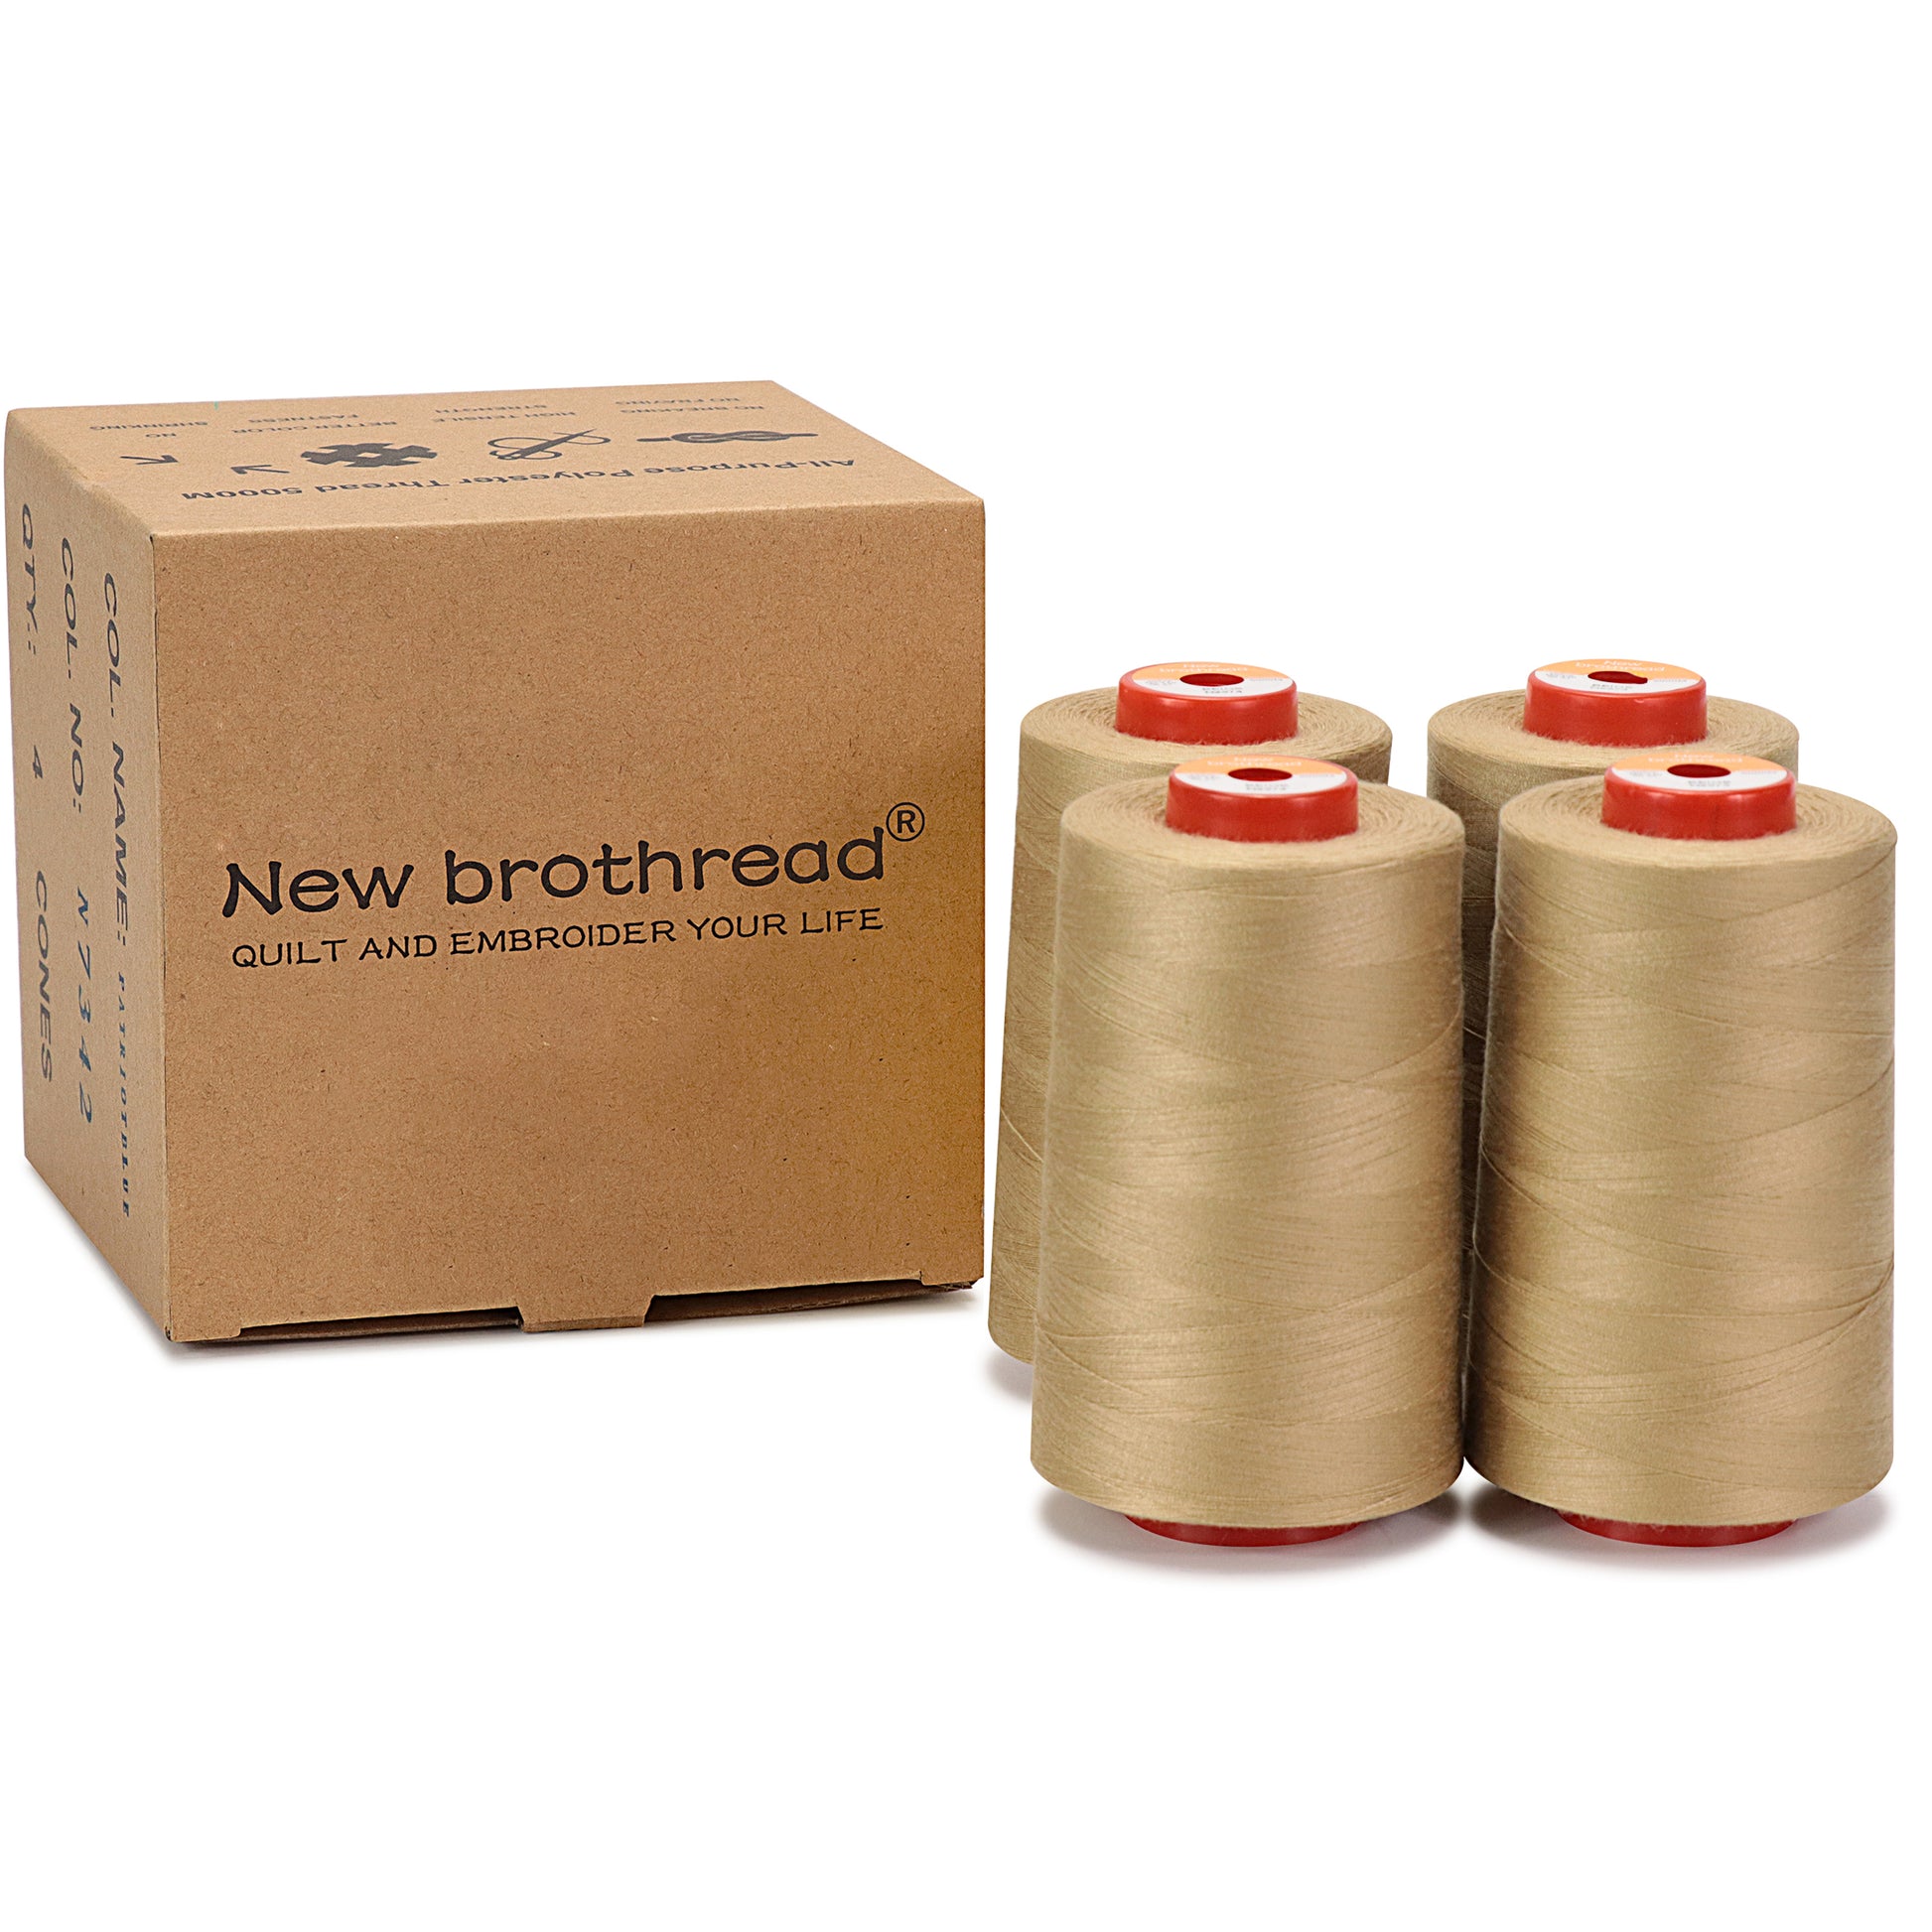 New brothread Single Huge Spool 5000M Each Polyester Embroidery Machine  Thread 40WT - Janome Colors